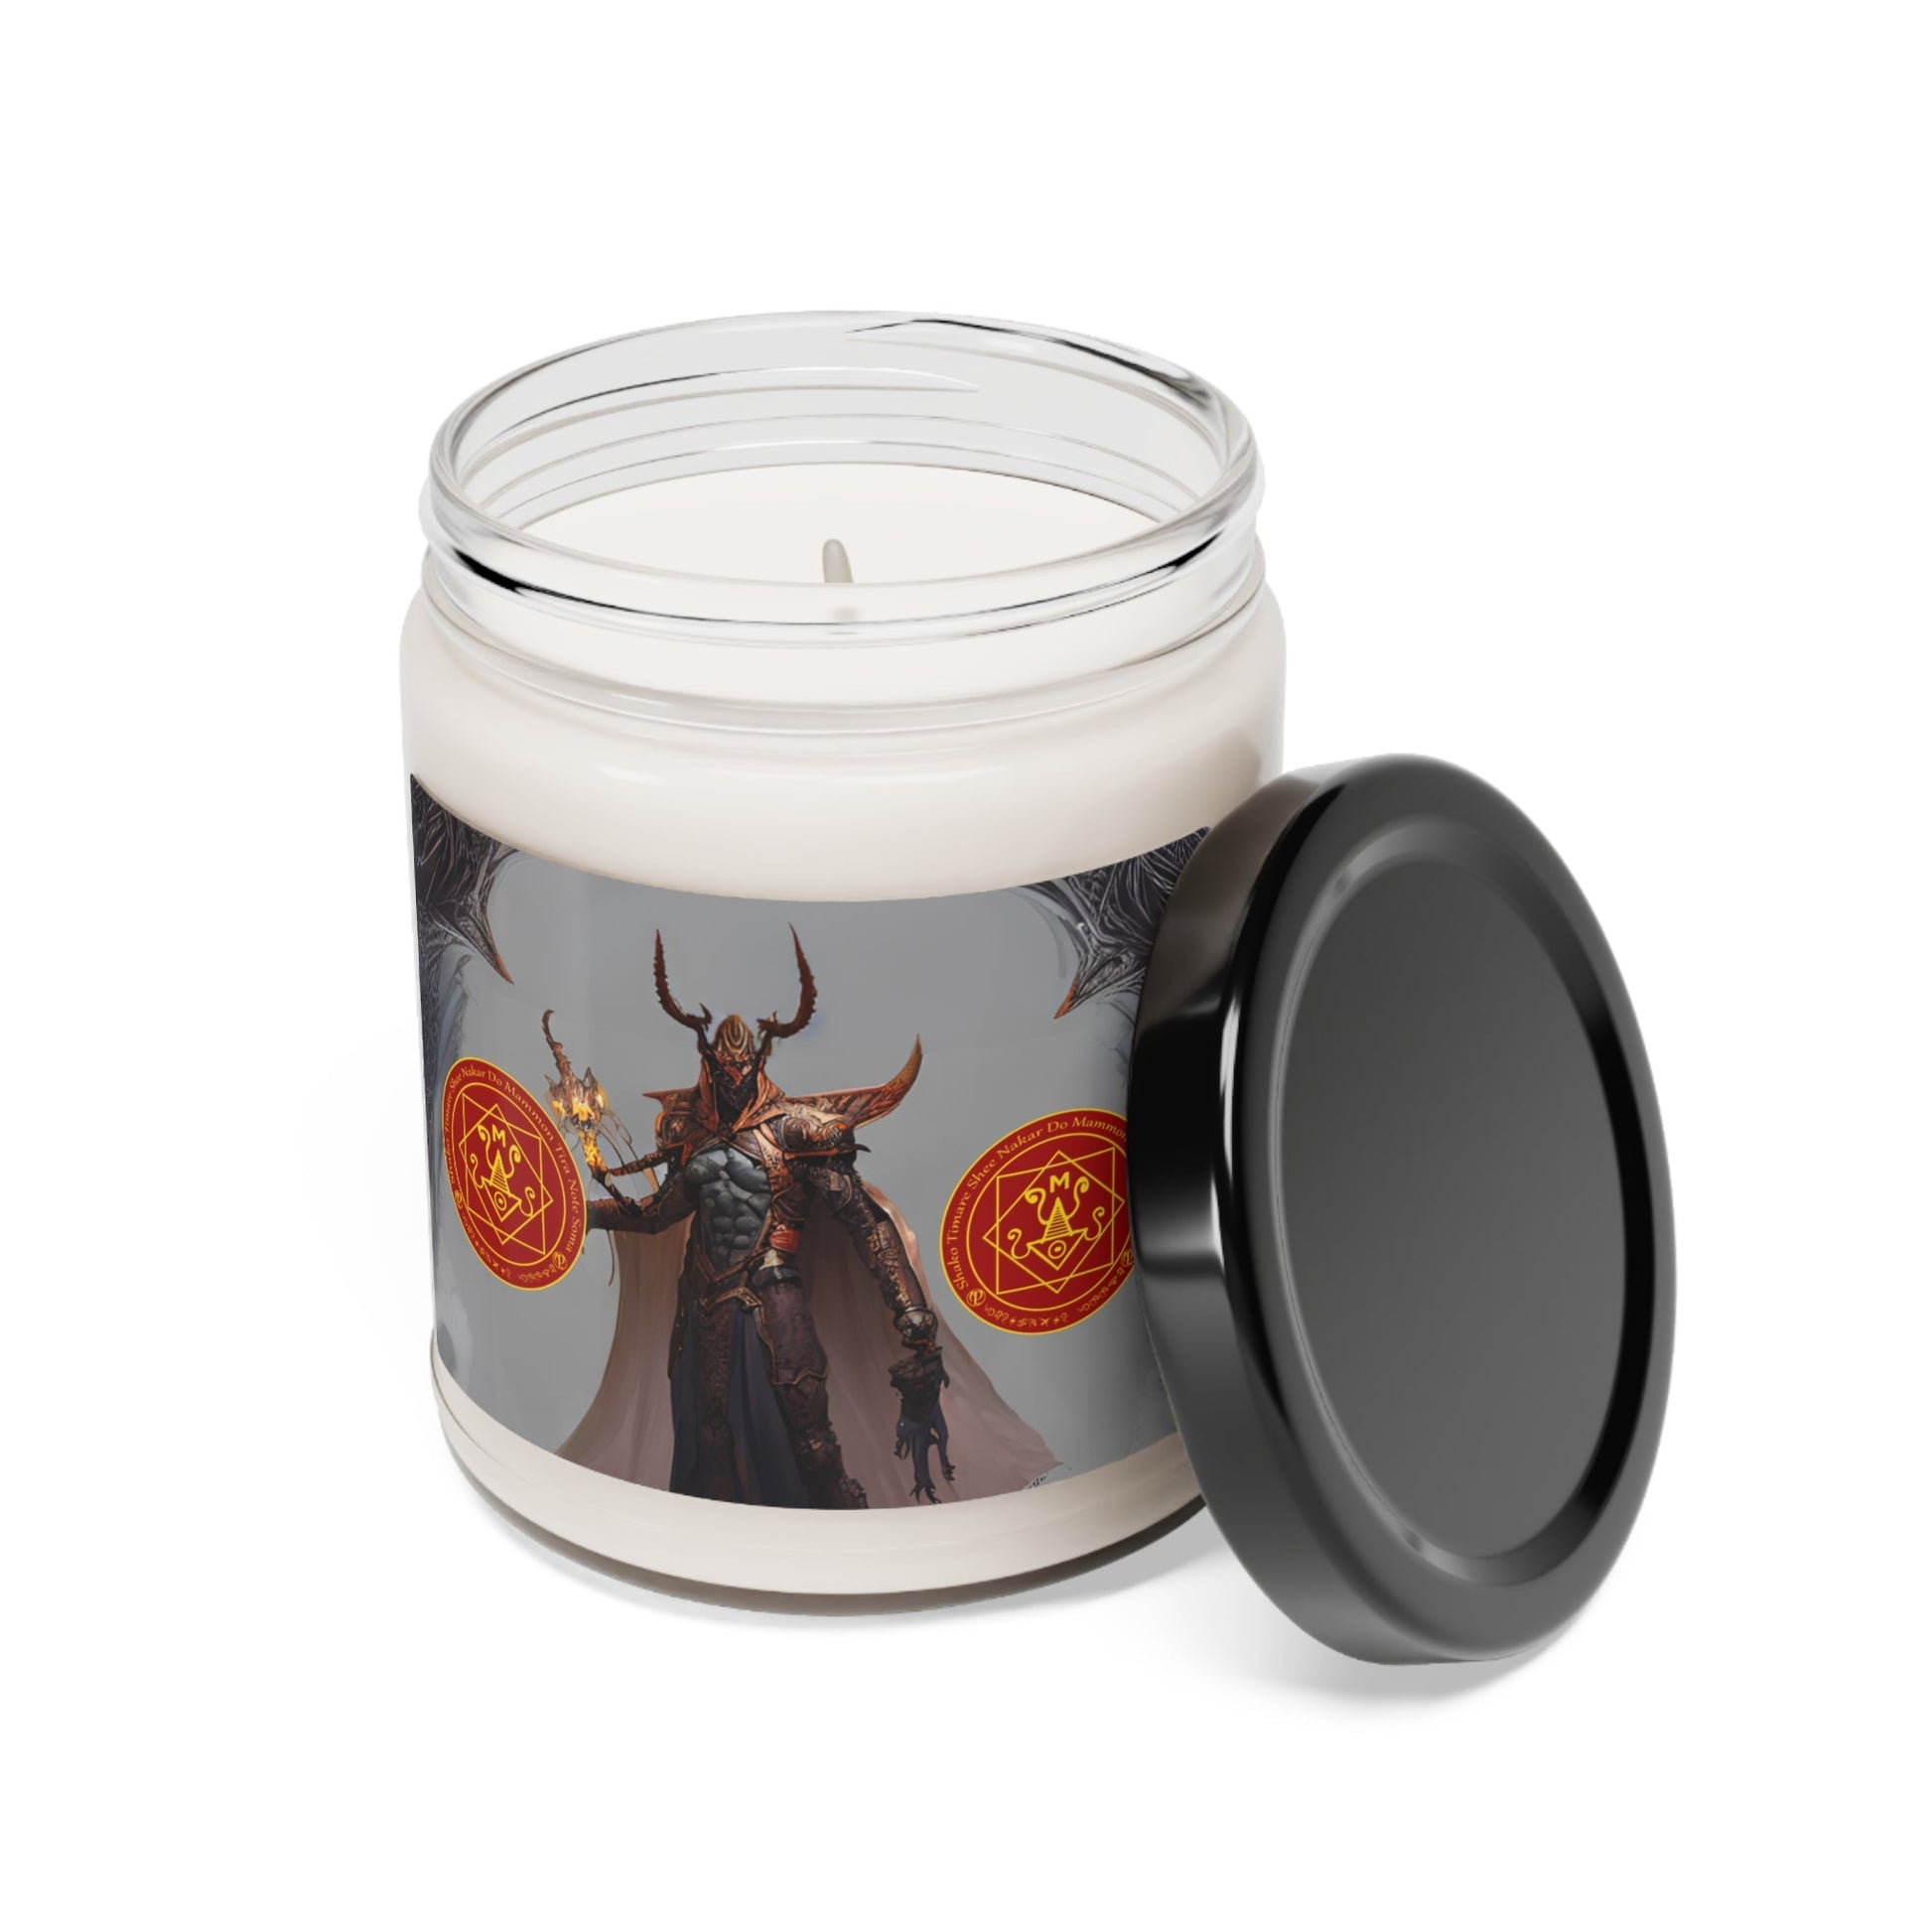 Demon-Mammon-Altar-Scented-Soy-Candle-for-Money-related-offerings-rituals-initiations-or-praying-and-meditation-2